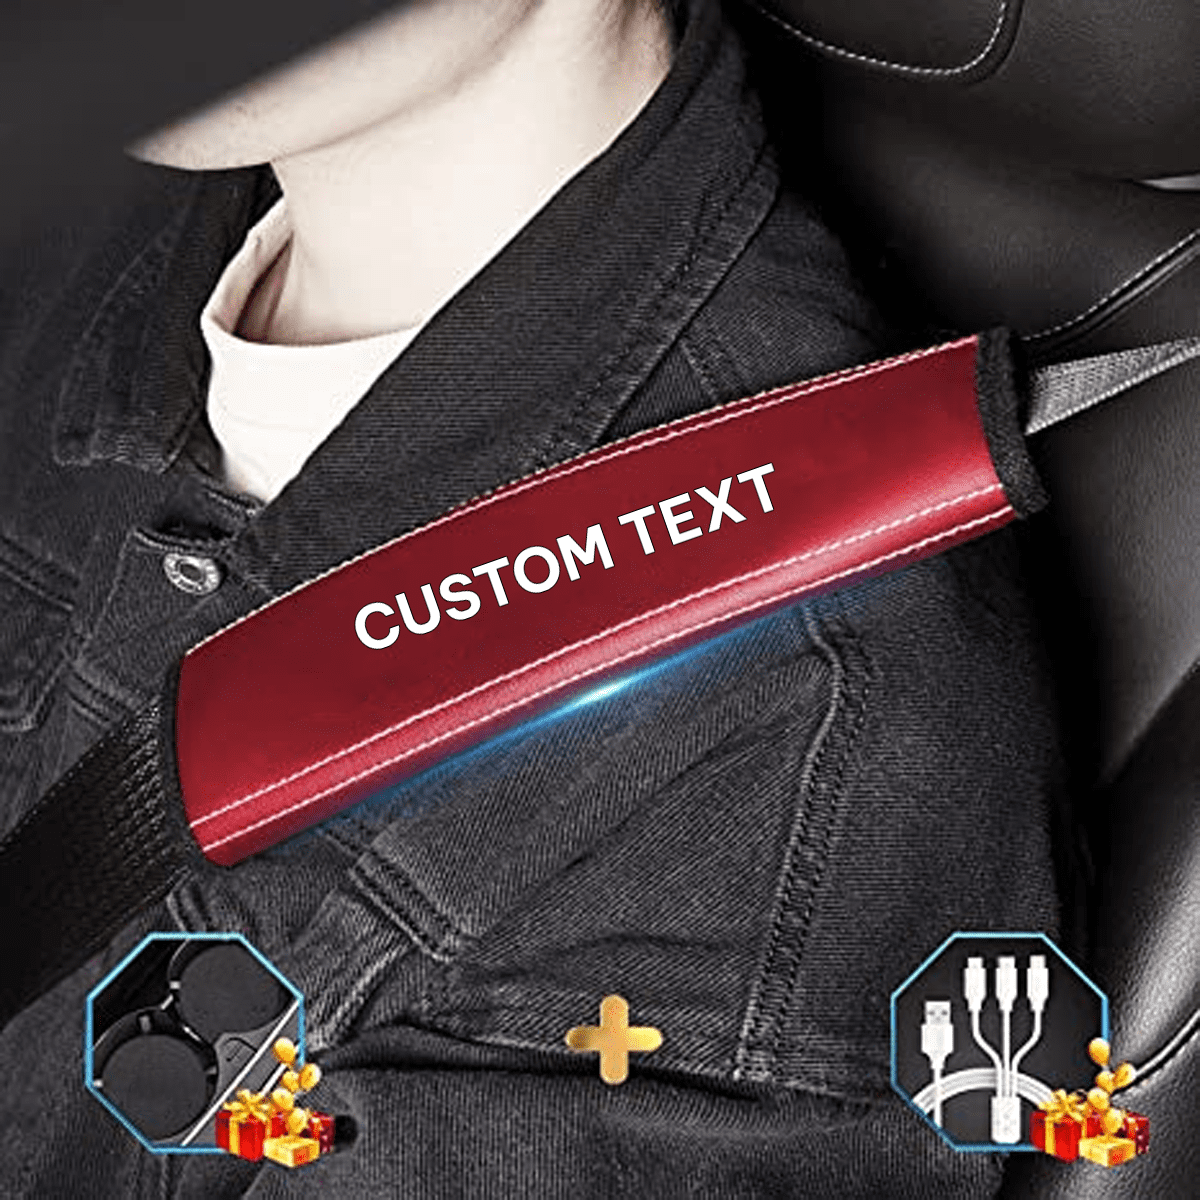 Custom Text and Logo Seat Belt Covers, Microfiber Leather Seat Belt Shoulder Pads for More Comfortable Driving, Set of 2pcs - Delicate Leather